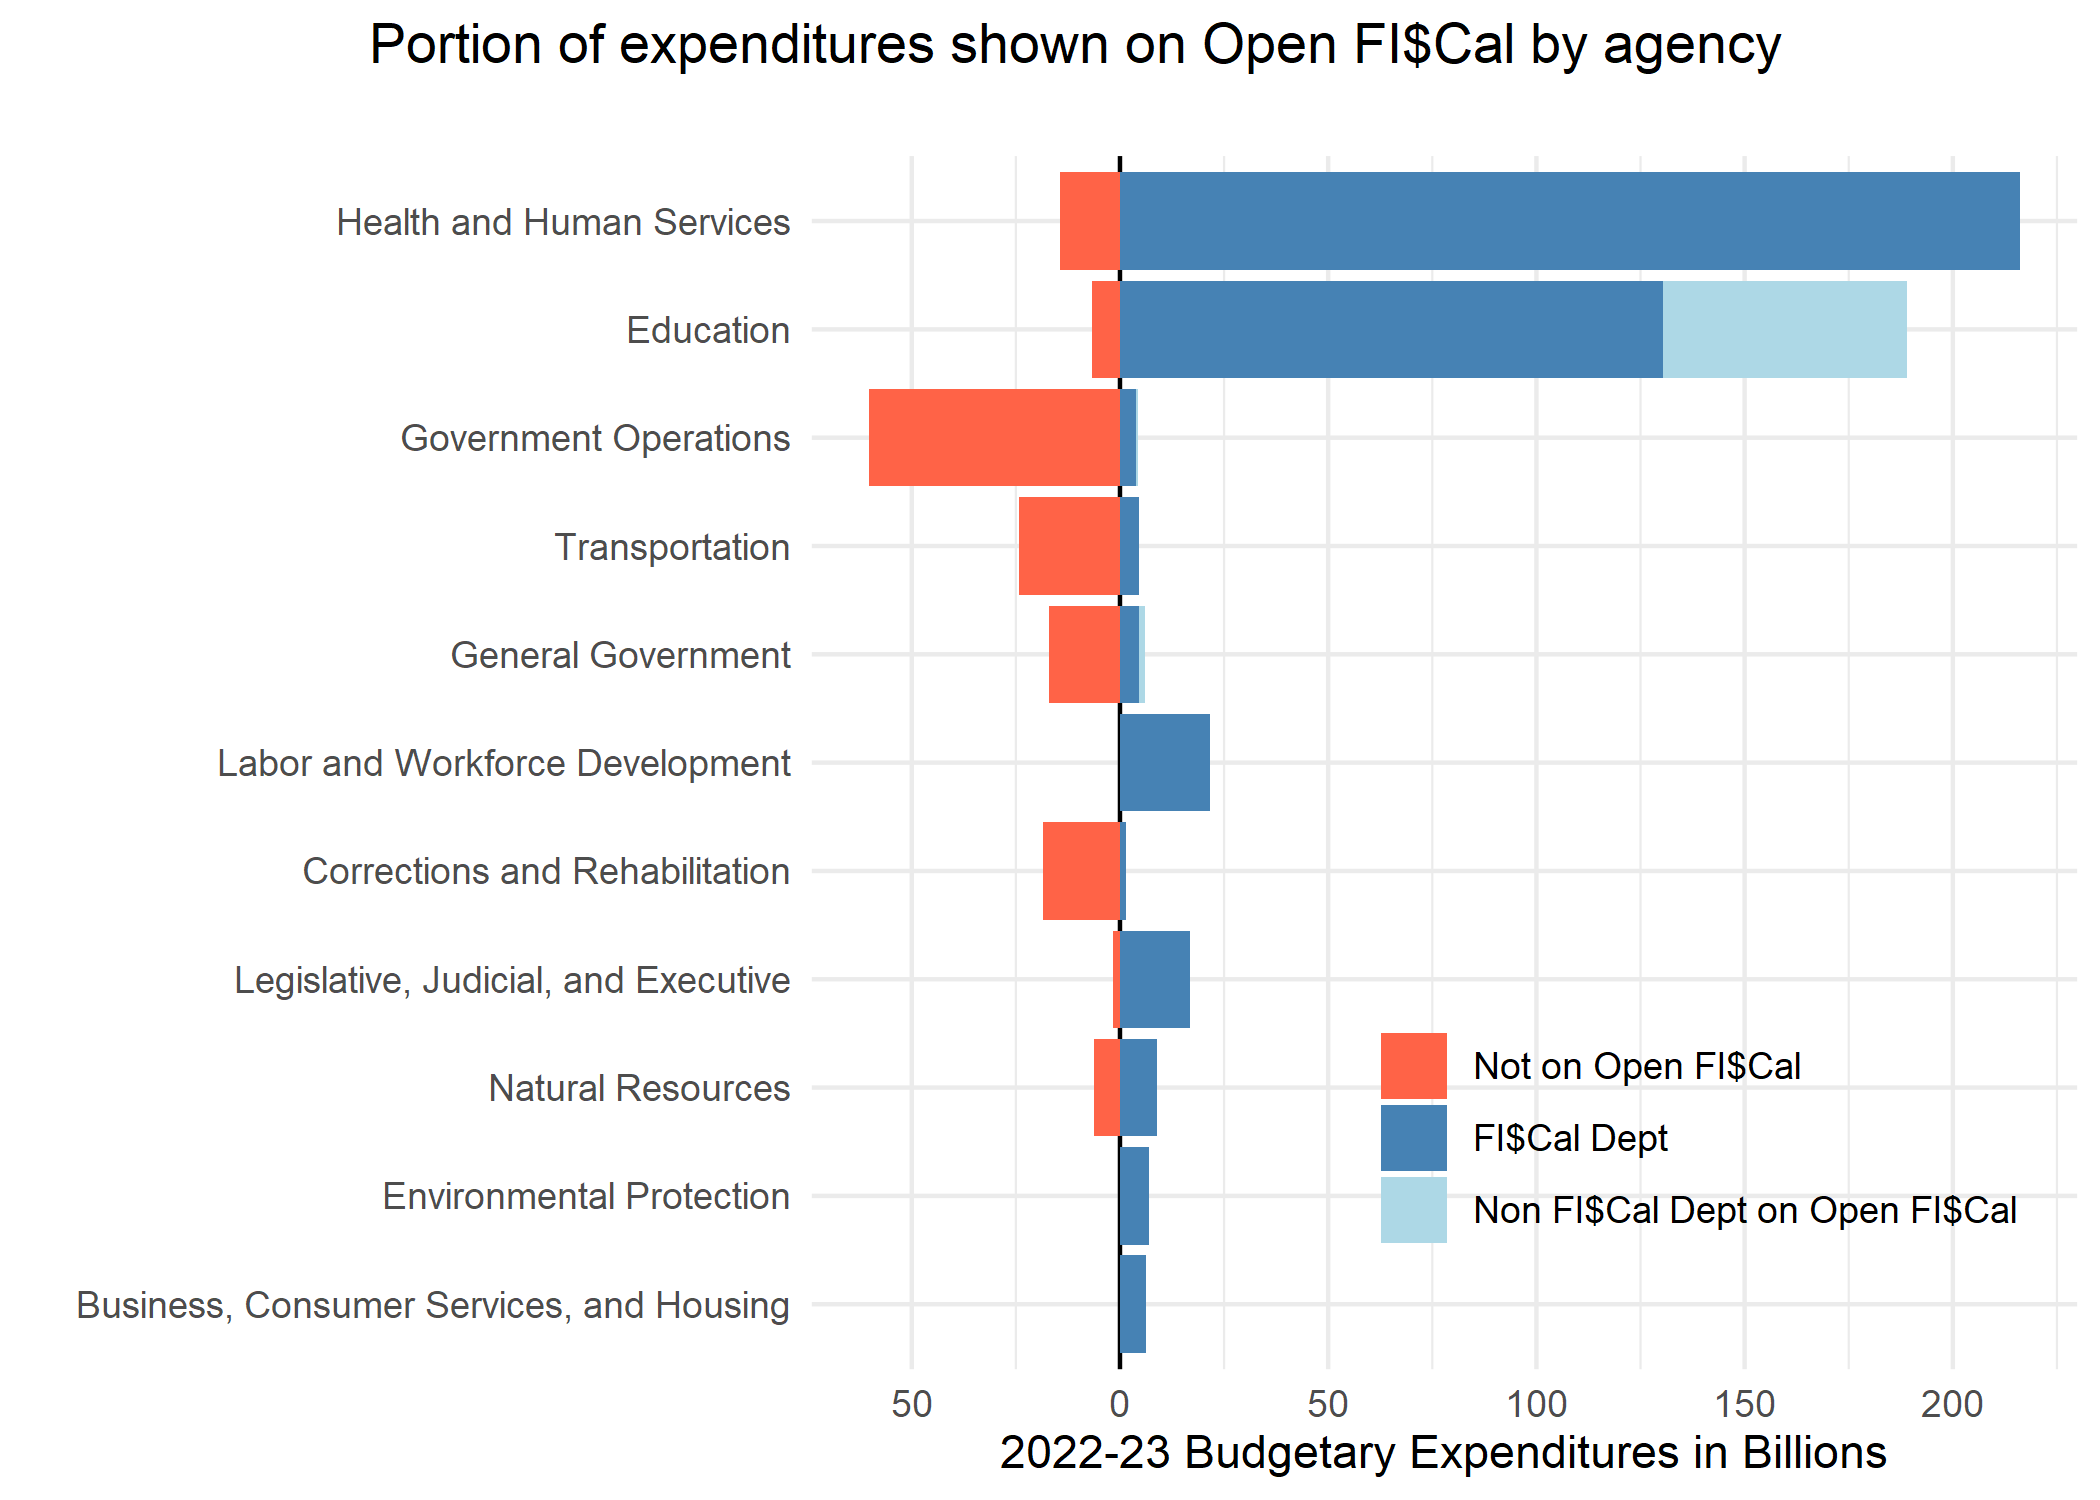 Bar graph showing portion of each state agency's expenditures that is available on Open FI$Cal.